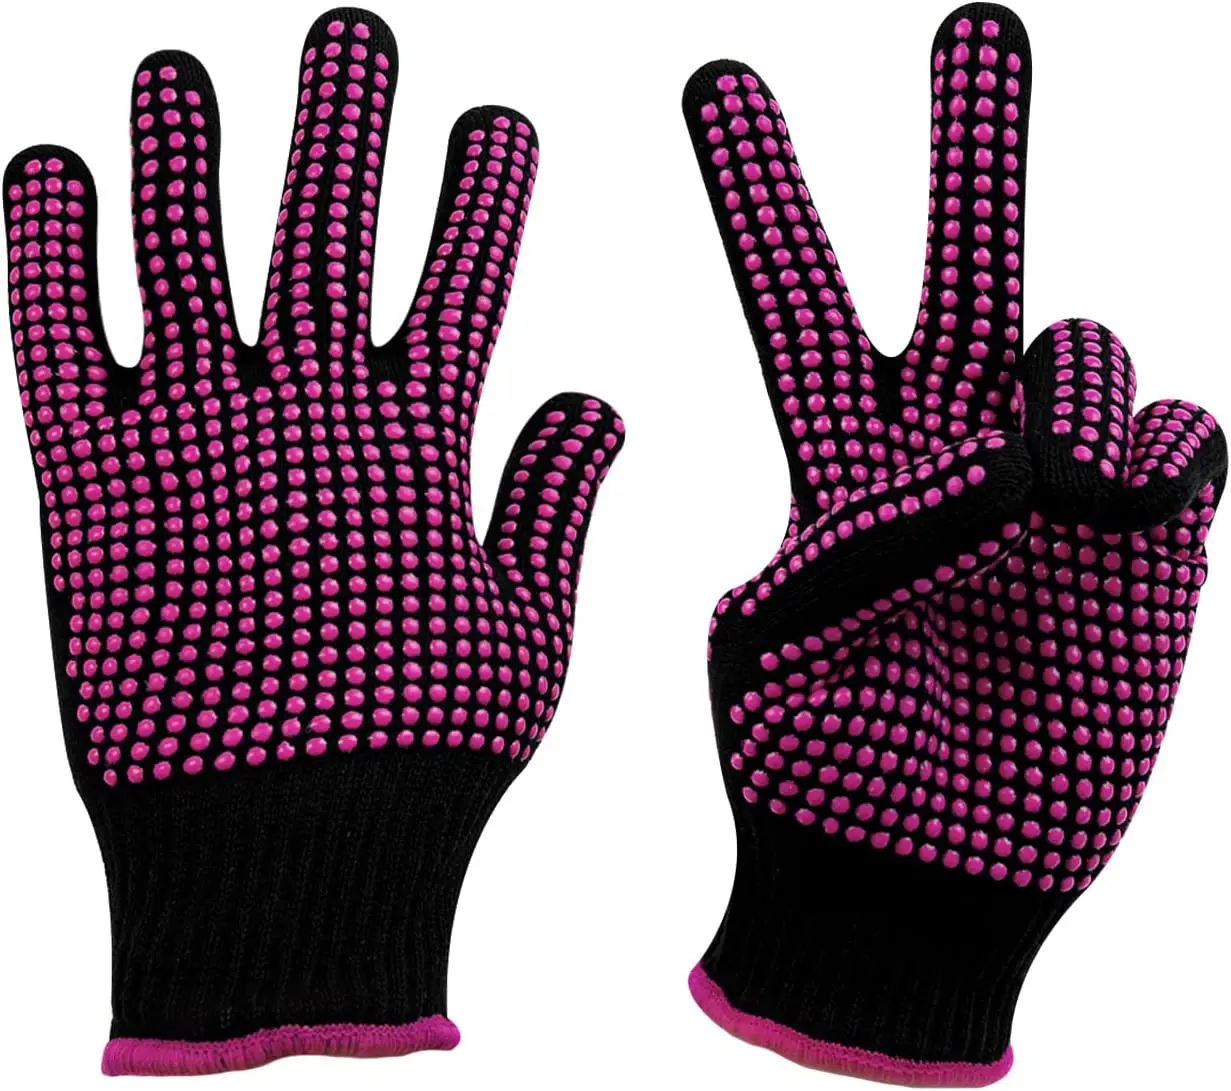 Professional Heat Proof Glove Mitts For Hair Styling Curling Iron Wand Flat Iron Hot-Air Brushes Sublimation Gloves